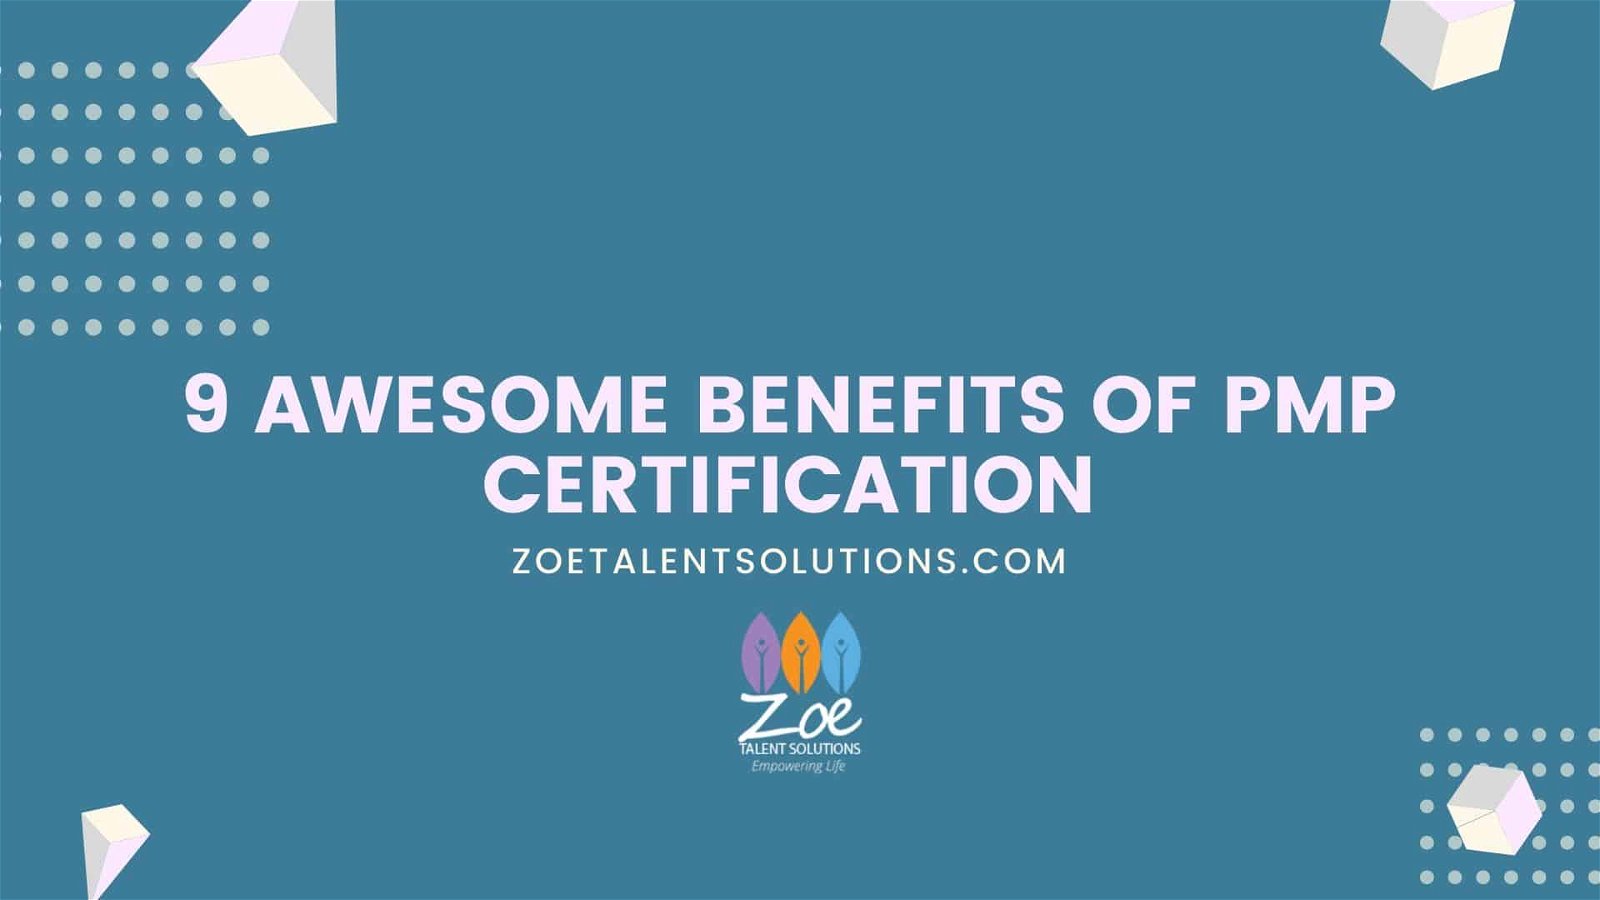 9 Awesome Benefits of PMP Certification